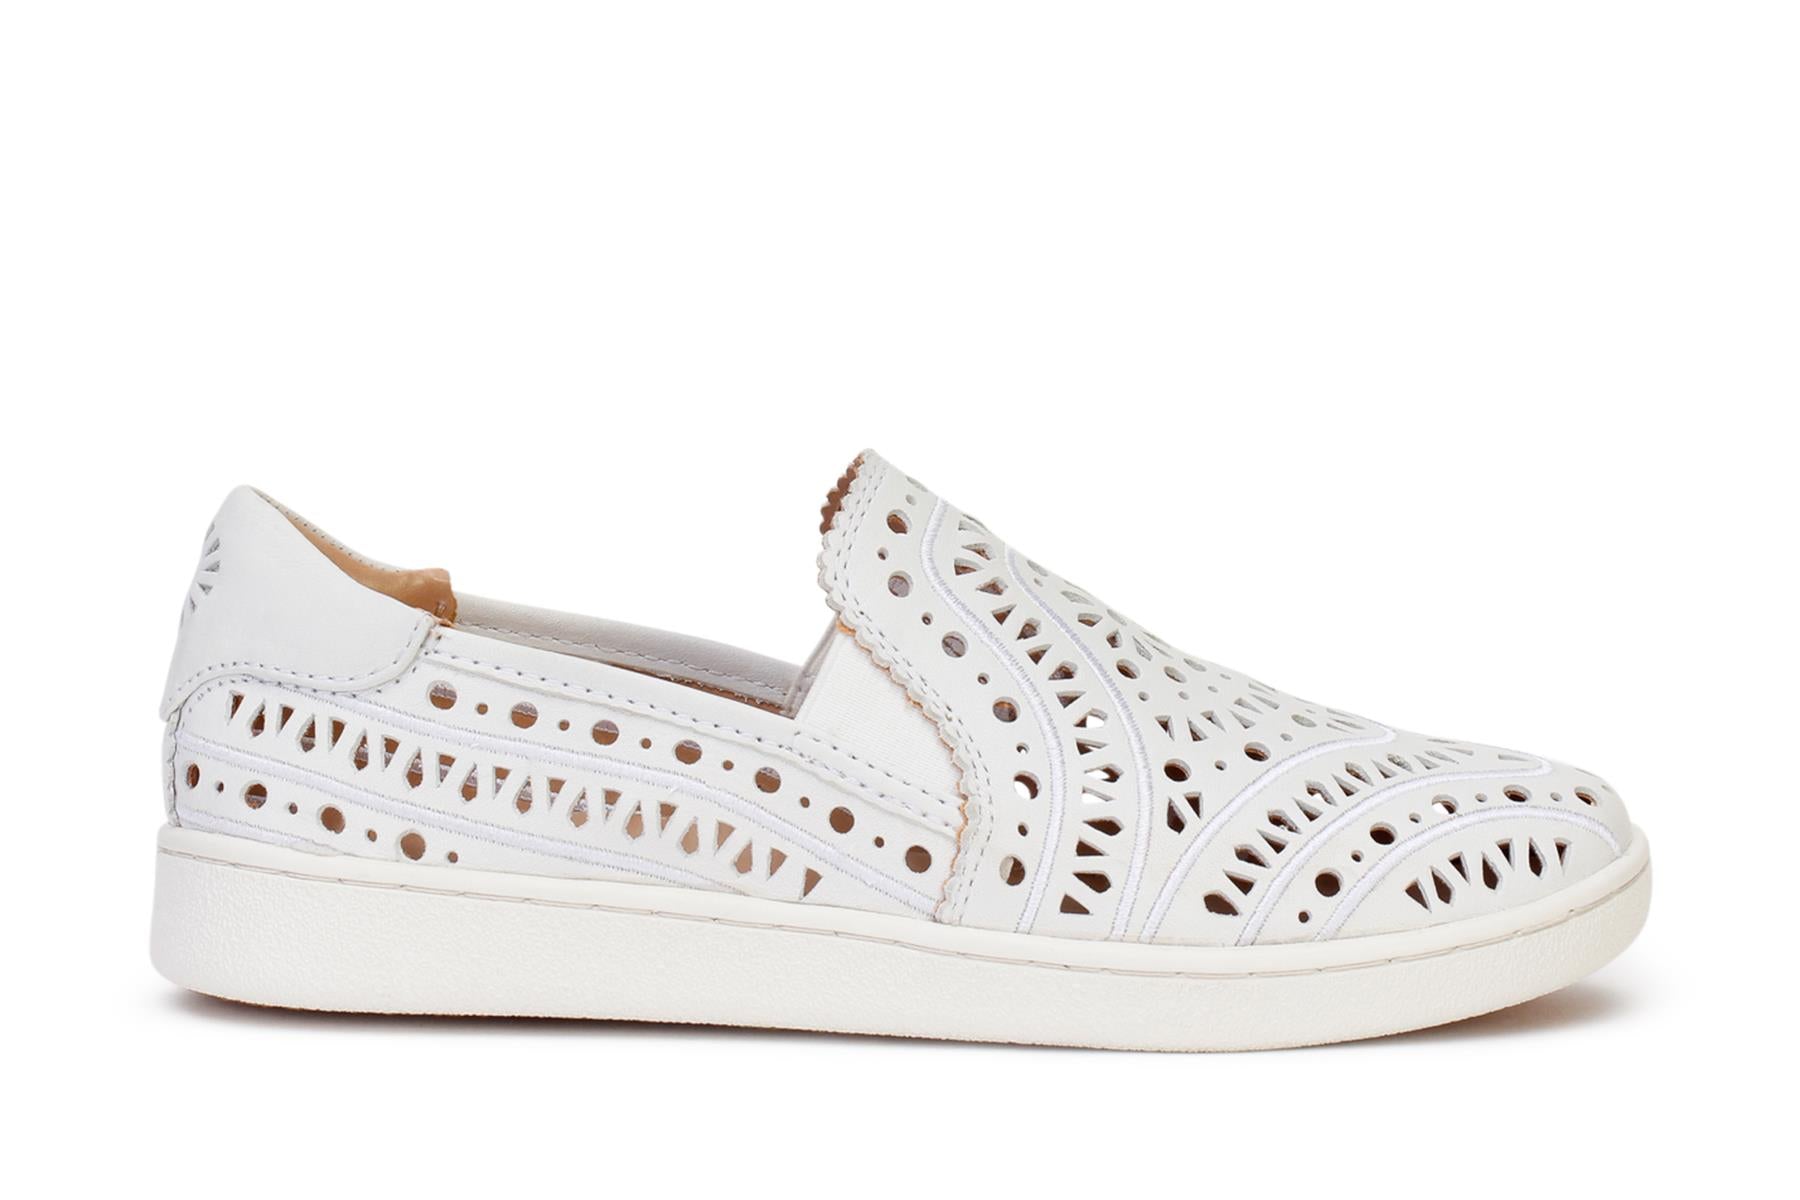 ugg-womens-cas-perf-casual-slip-on-sneakers-white-leather-main